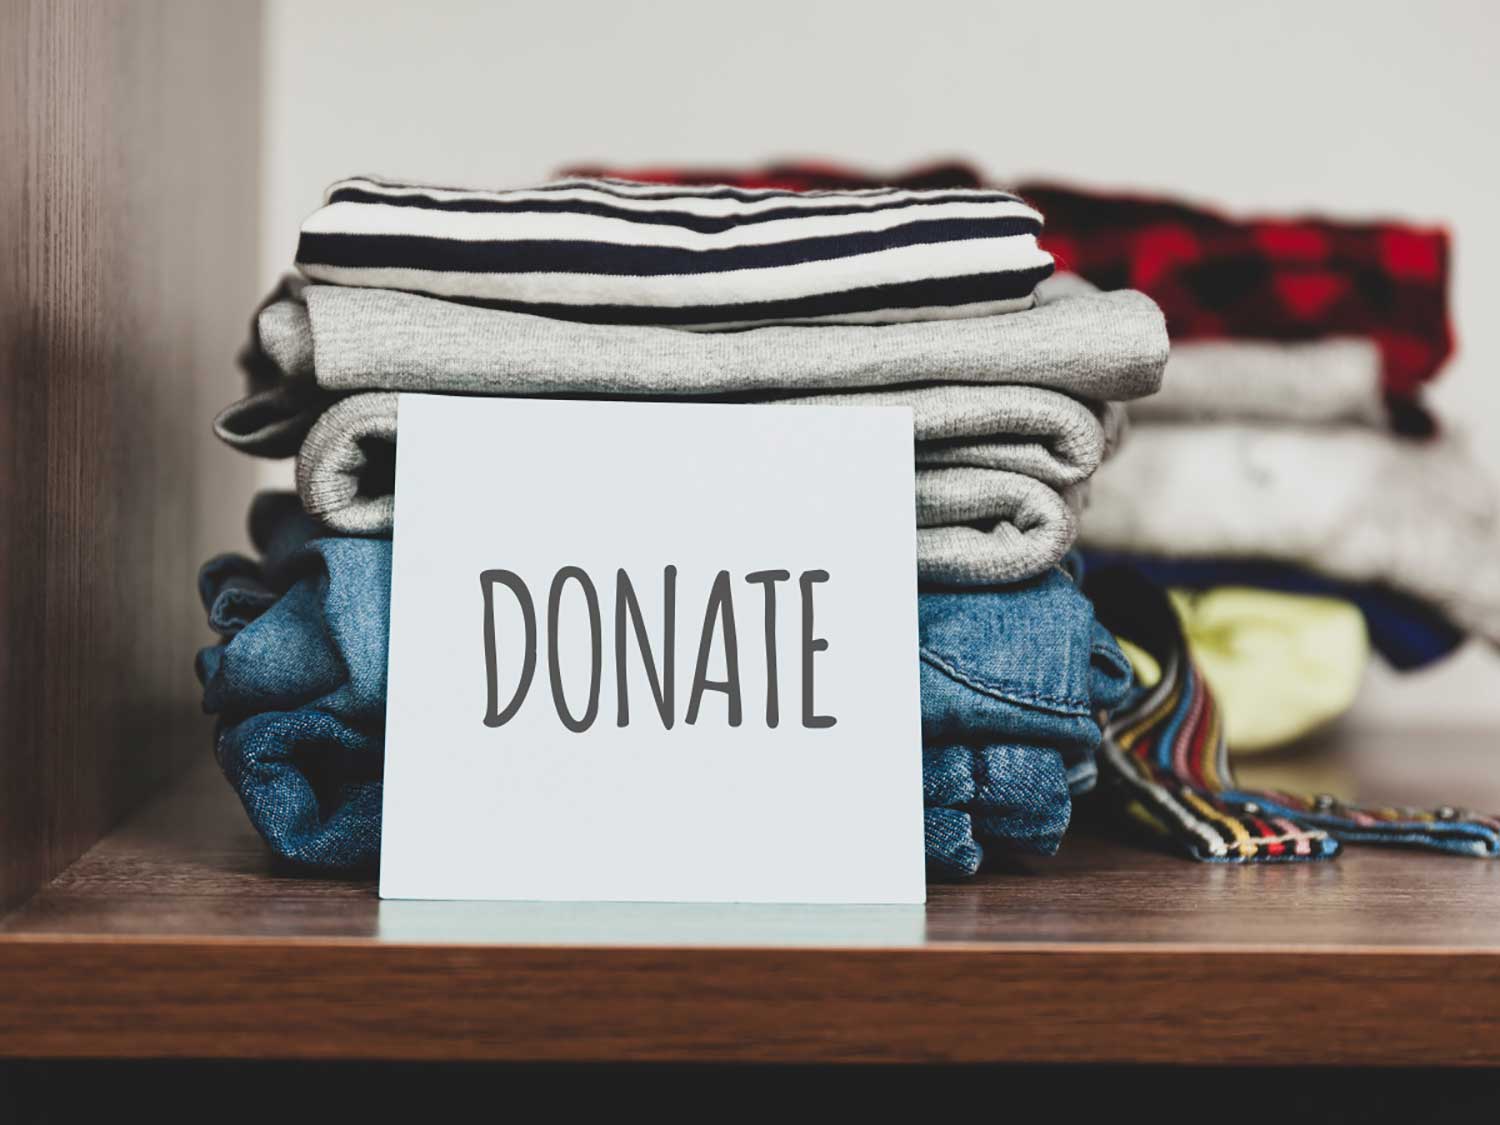 Donating unused clothing is great way to build a sustainable wardrobe